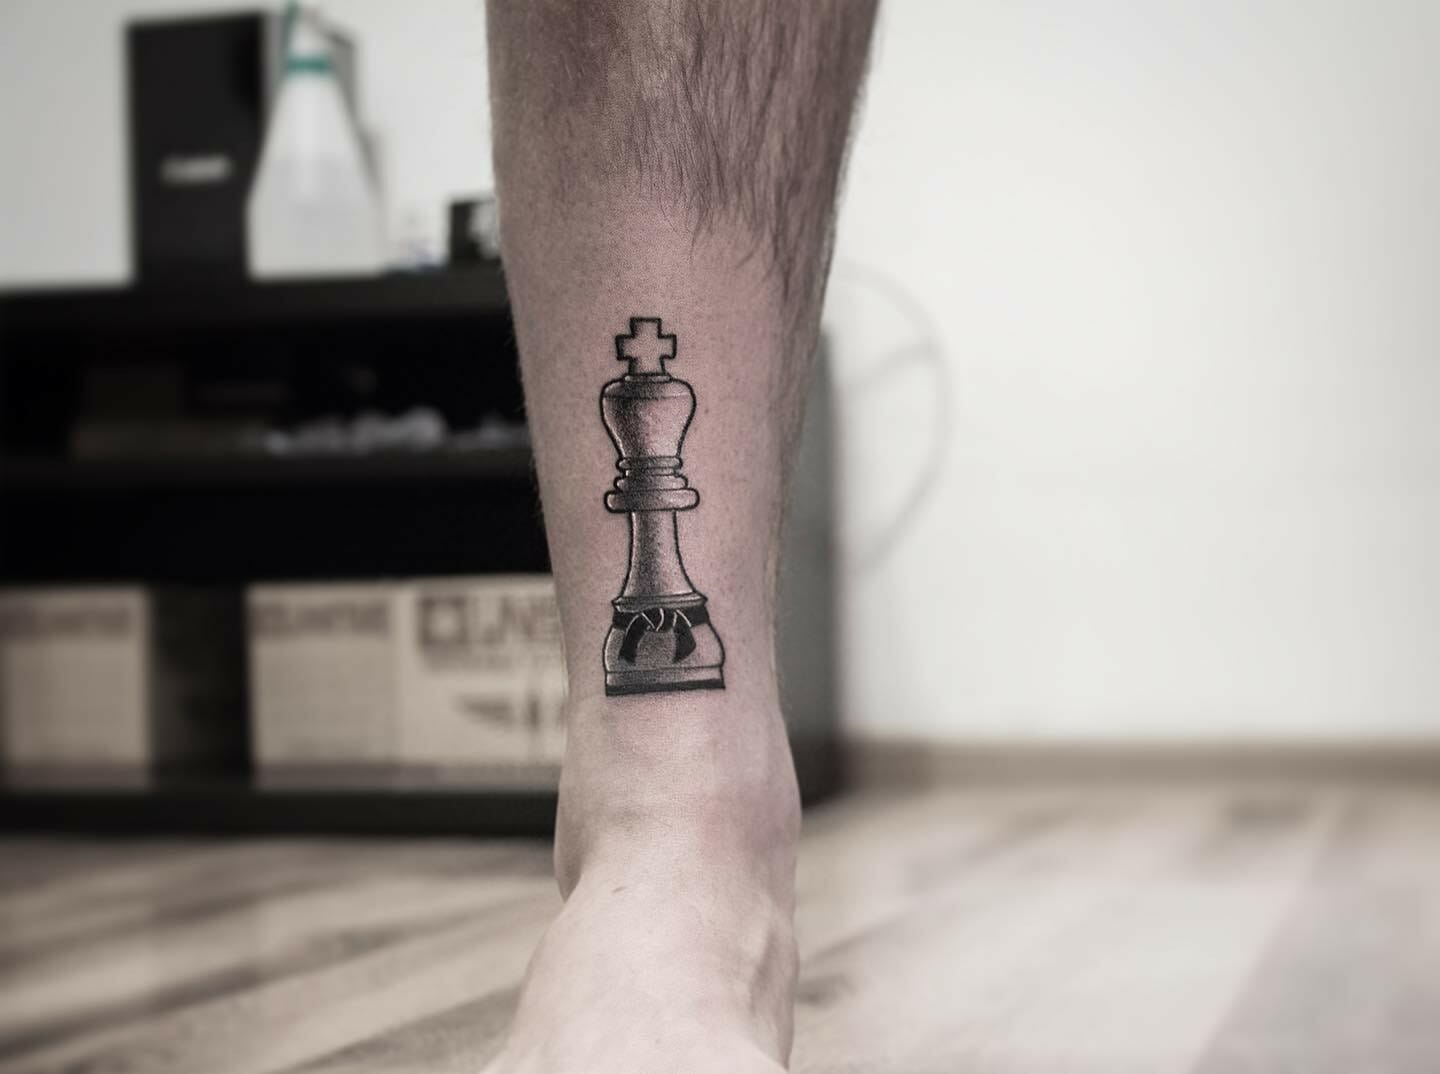 10 Best Chess King Tattoo Ideas That Will Blow Your Mind!

+2023